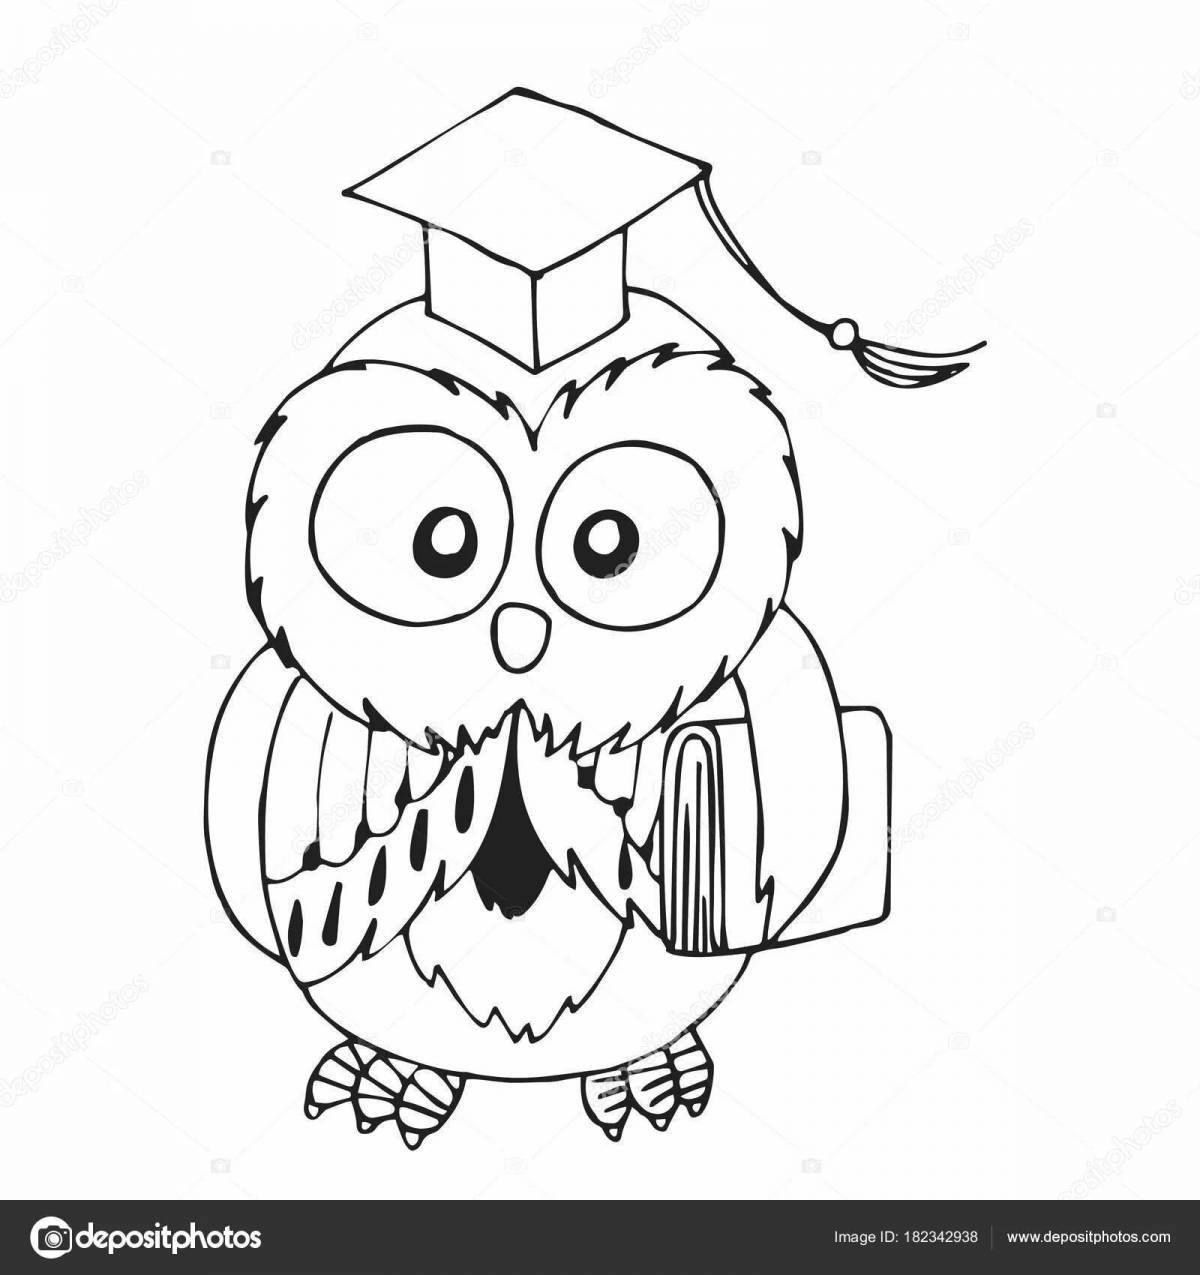 Sleek and wise owl coloring pages for kids